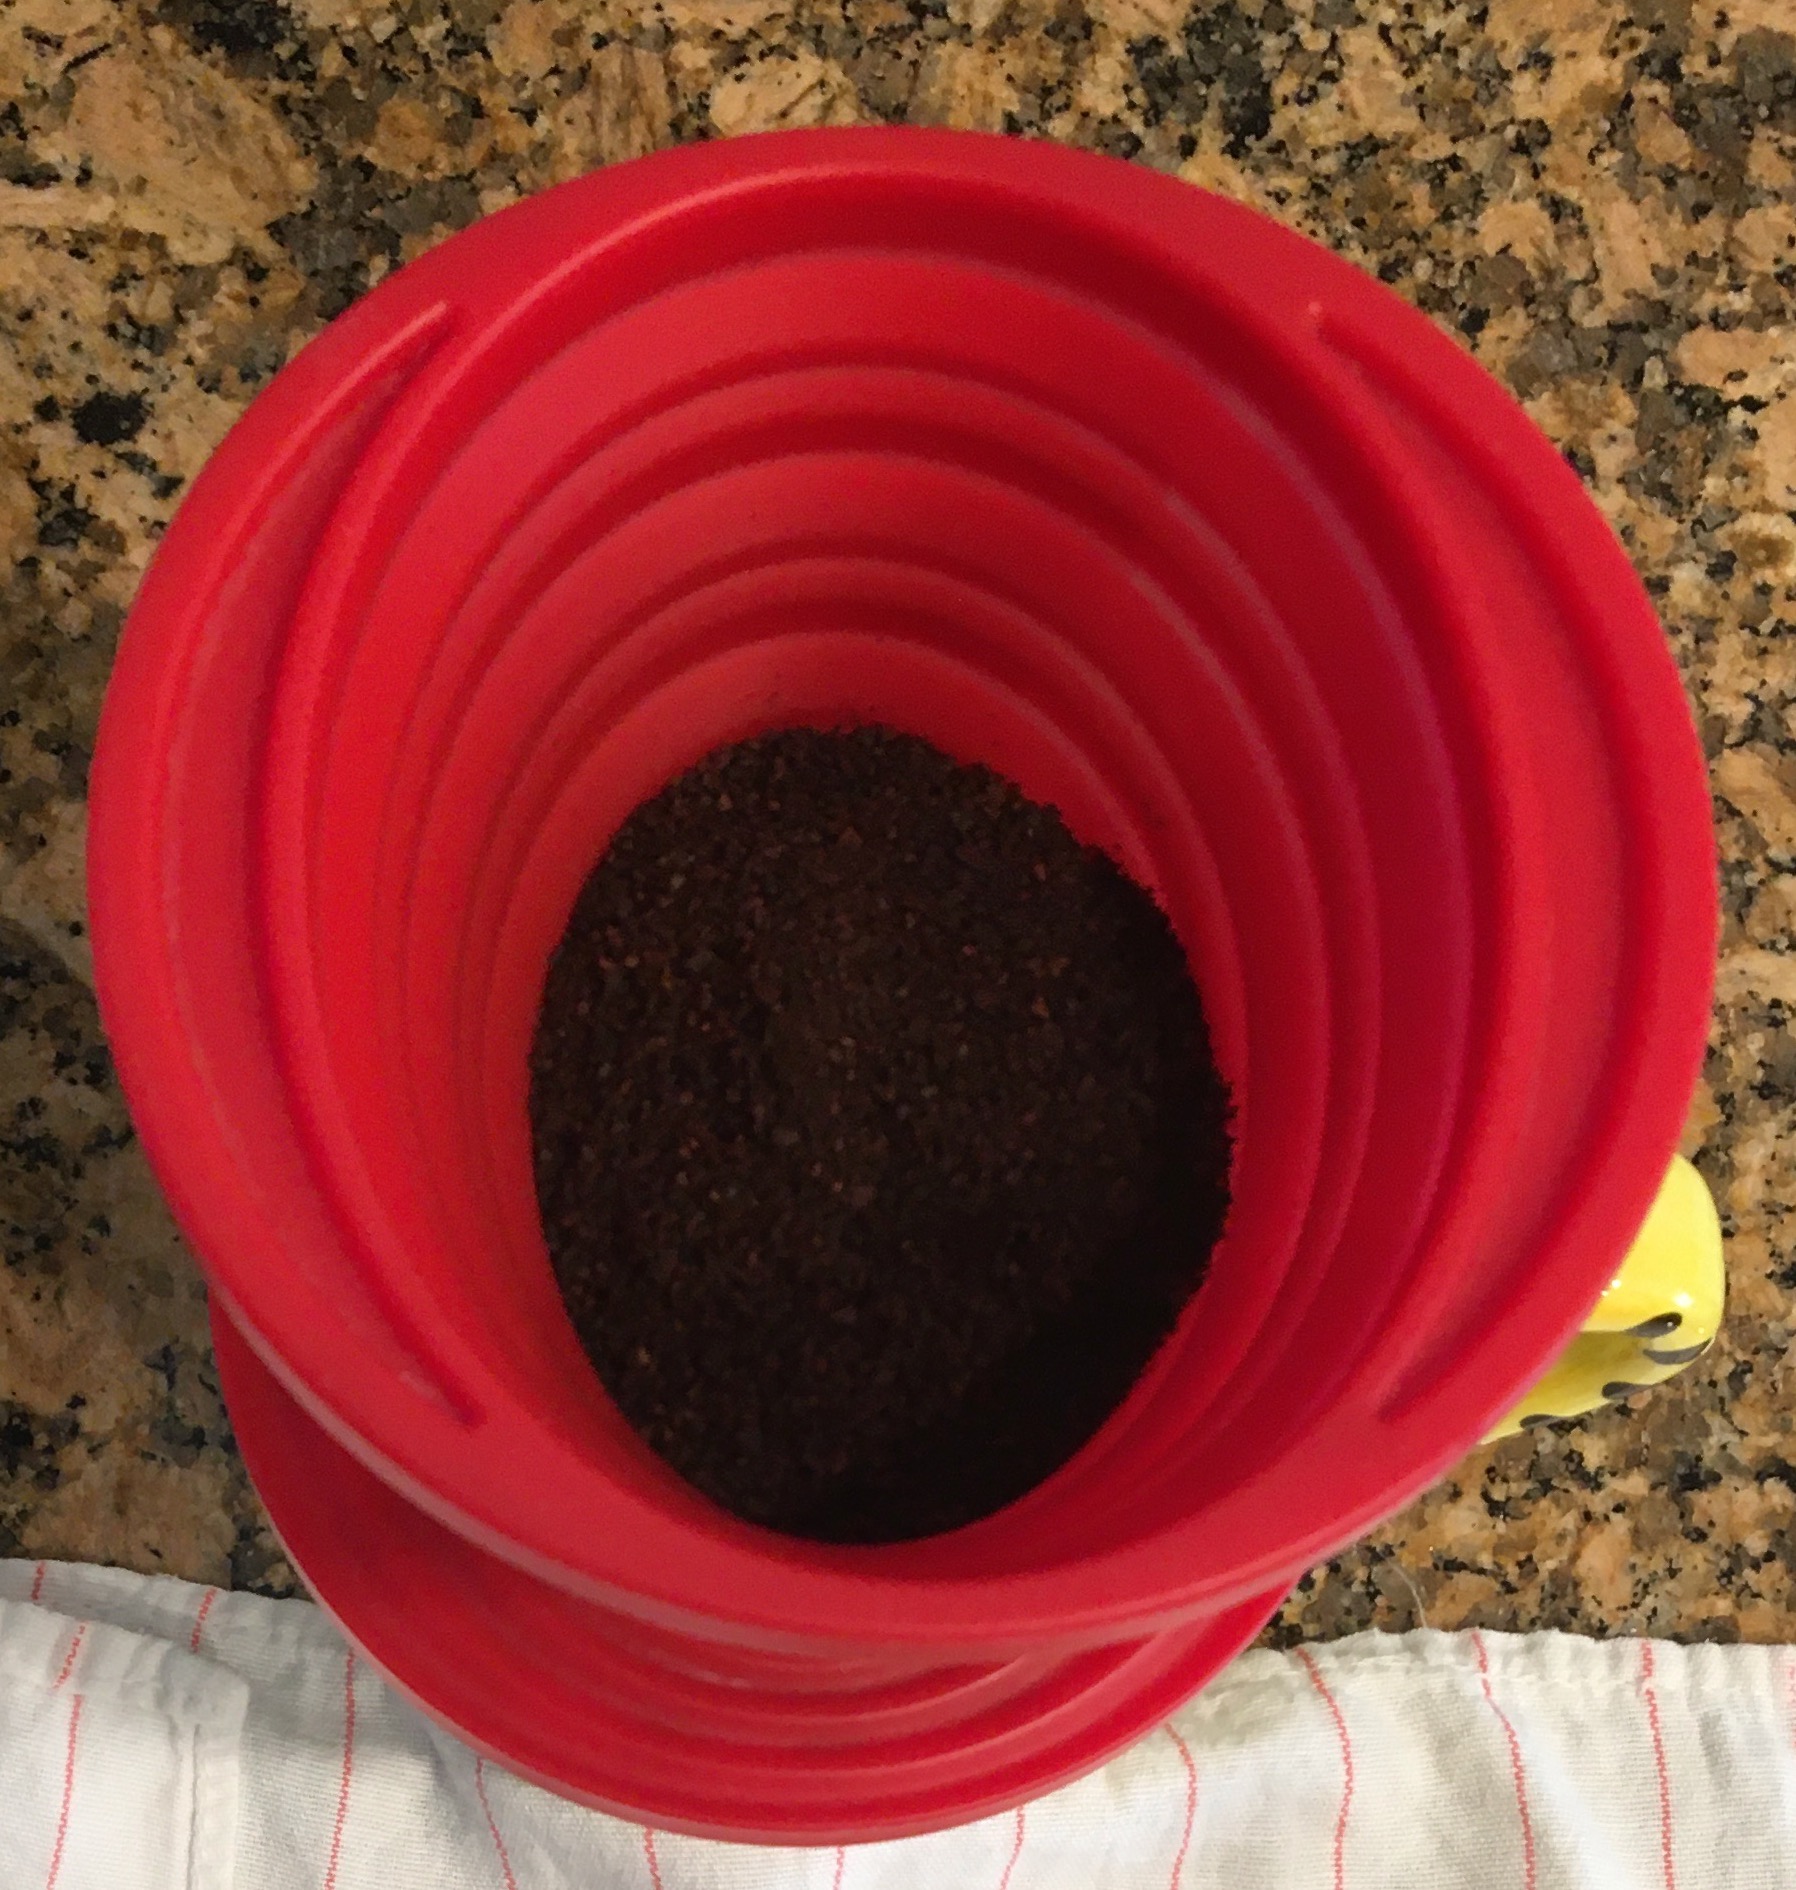 Photo of a red, silicon coffee filter containing coffee grounds.